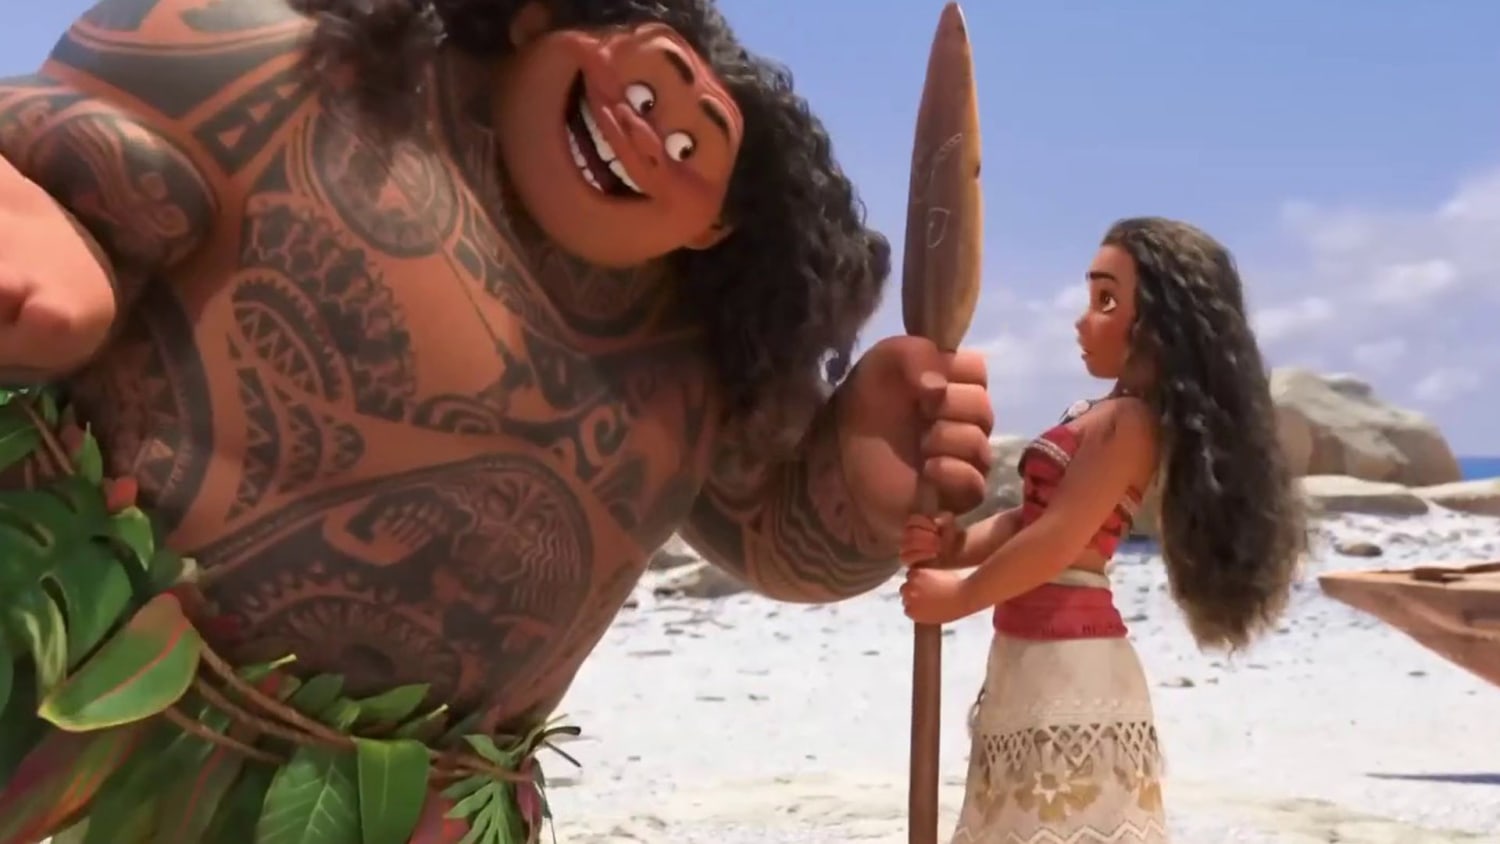 Dwayne Johnson reveals he's shooting live-action remake of 'Moana' -  GulfToday